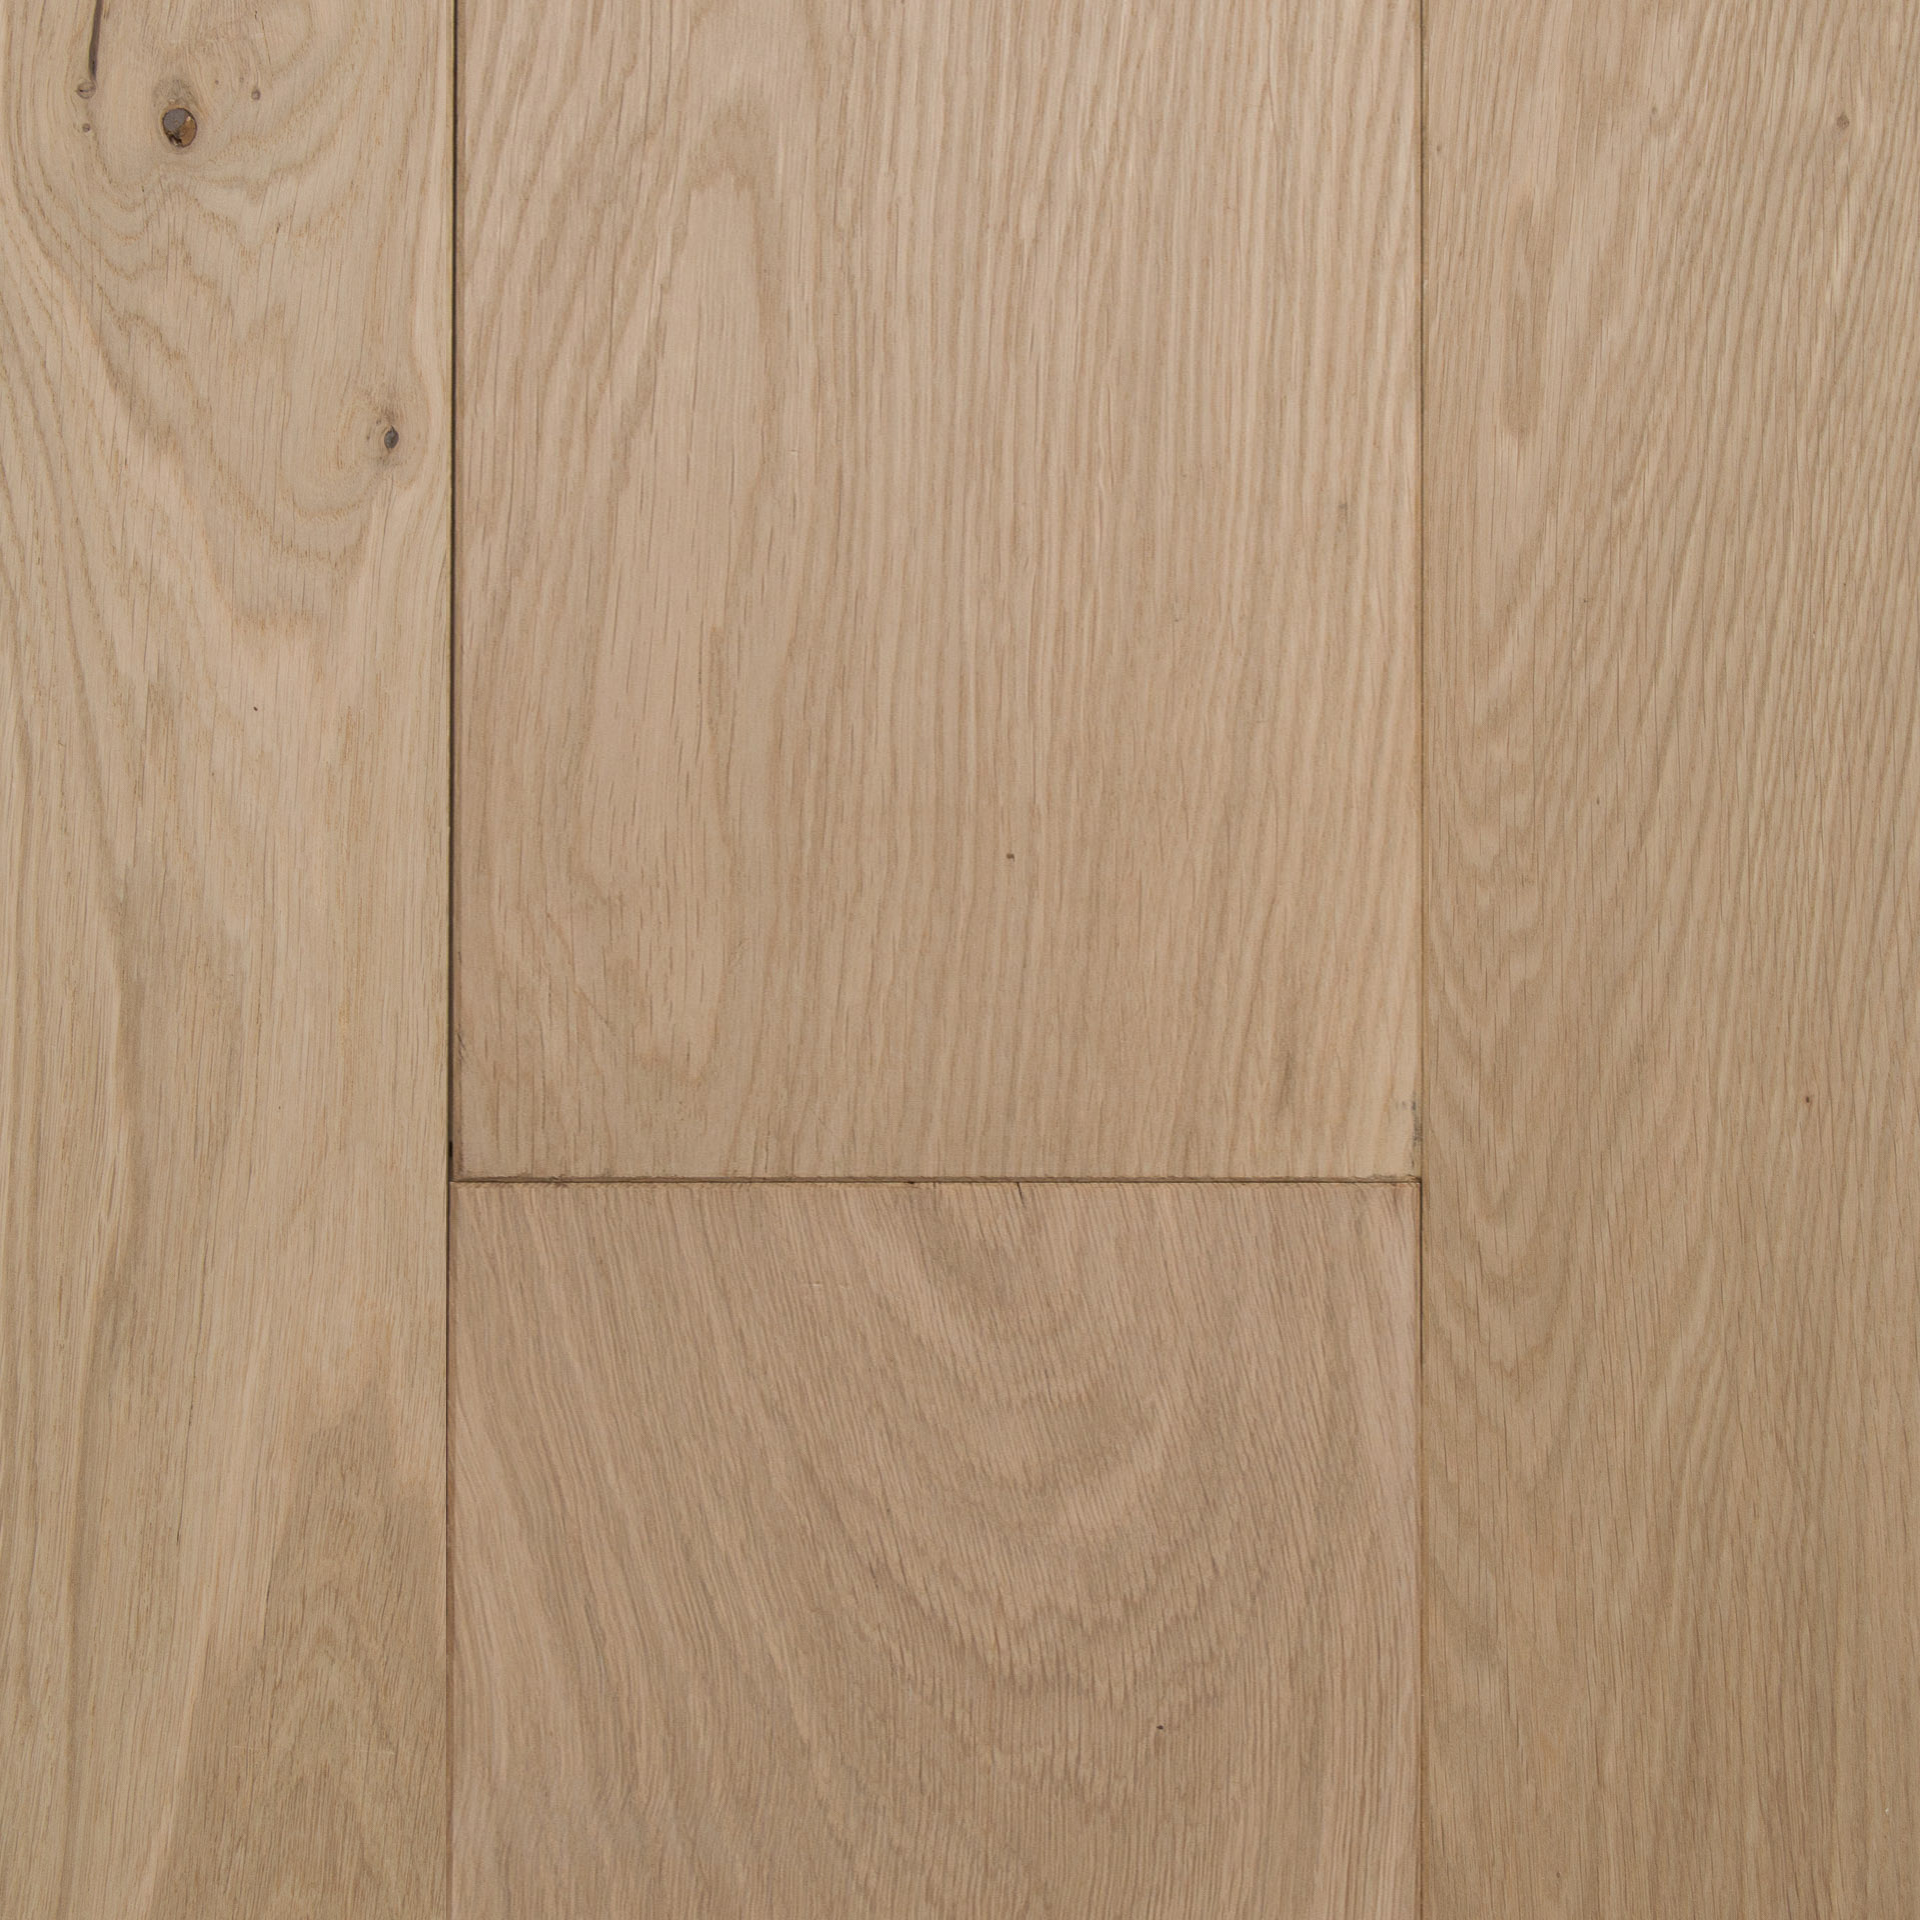 Wide Planks 220mm Extra Volks, Extra Wide Wood Laminate Flooring